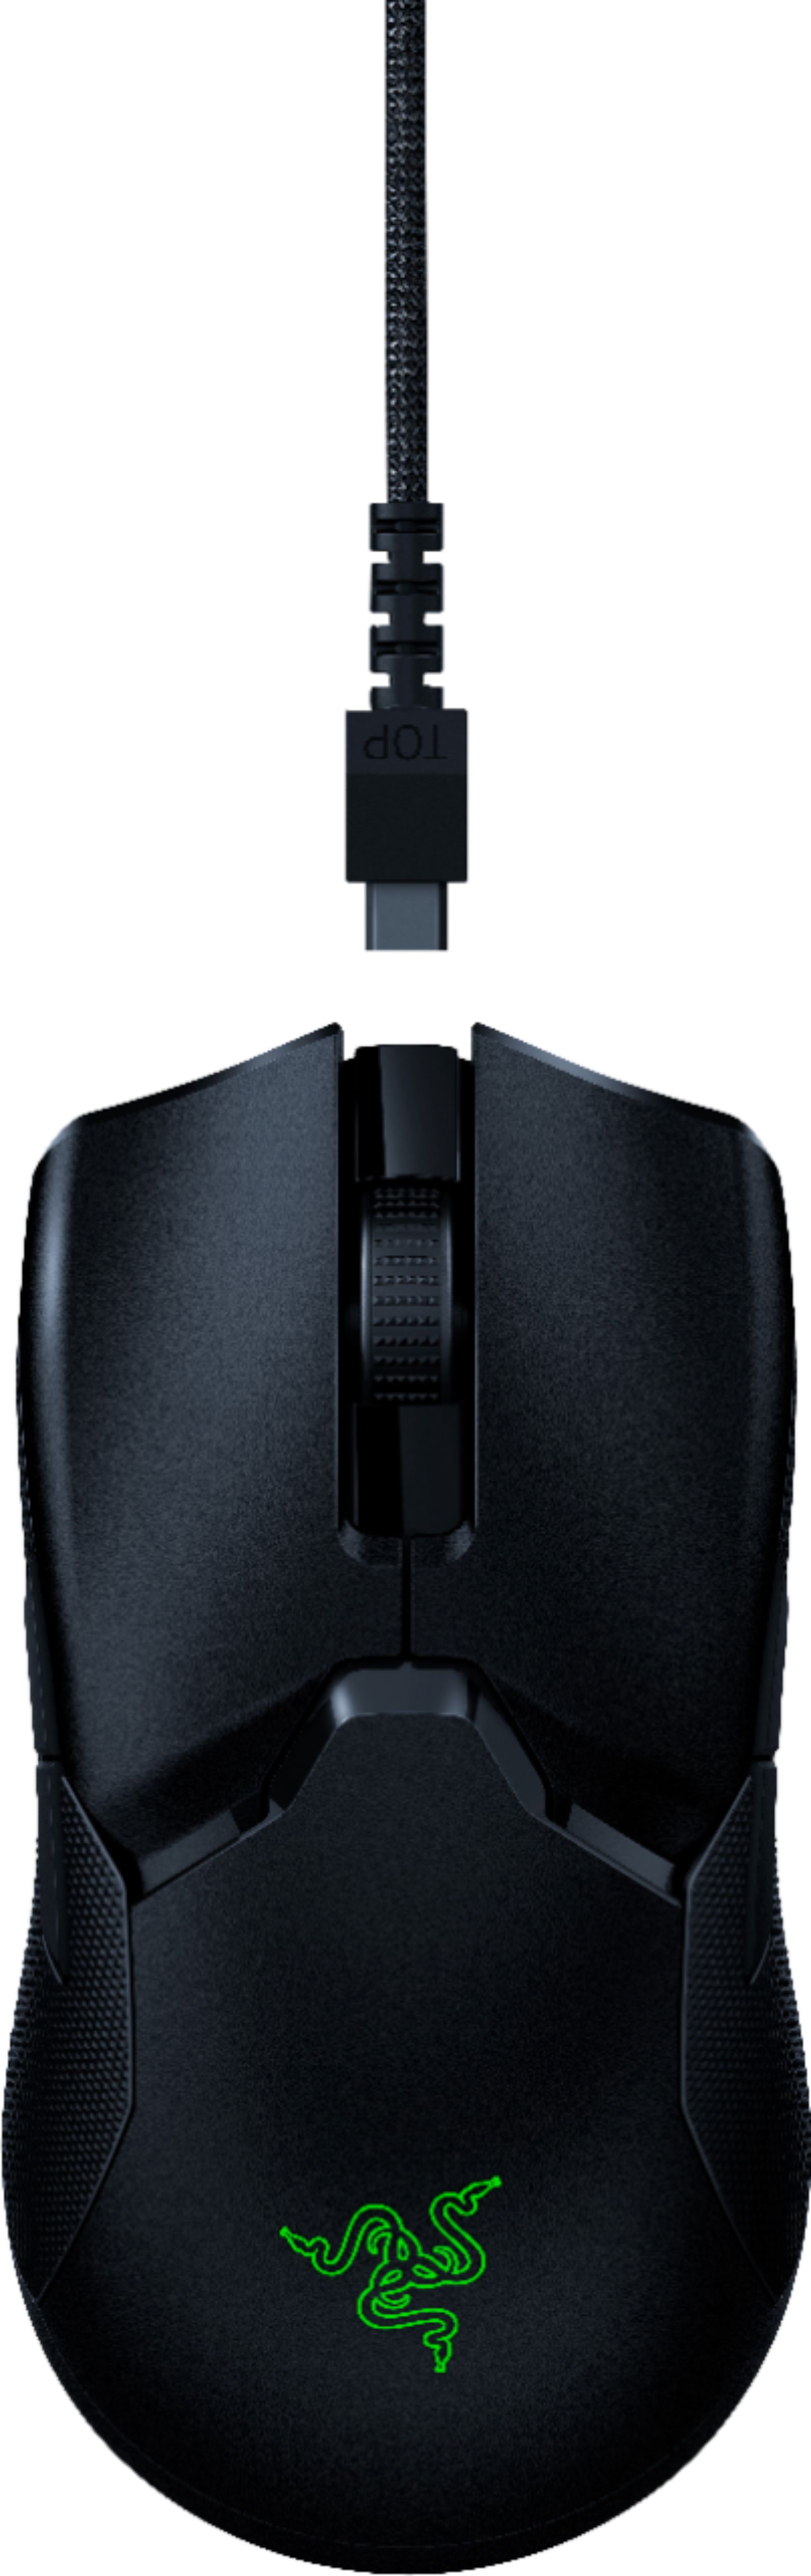 Razer - Viper Ultimate Ultralight Wireless Optical Gaming Mouse with  Charging Dock - Black